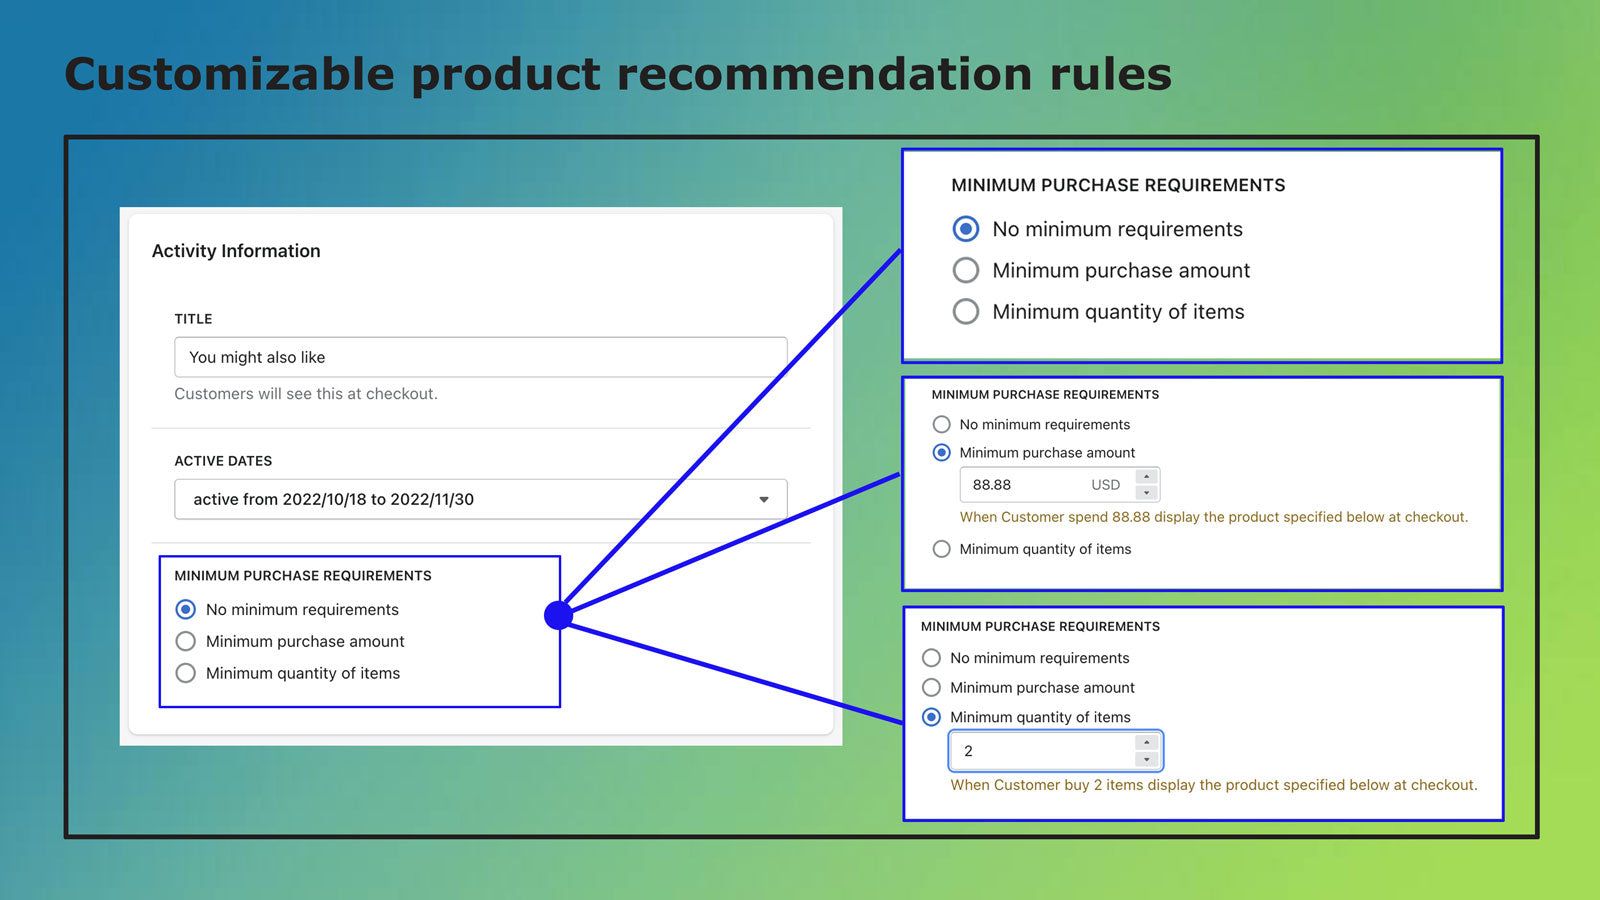 Customized product recommendation rules